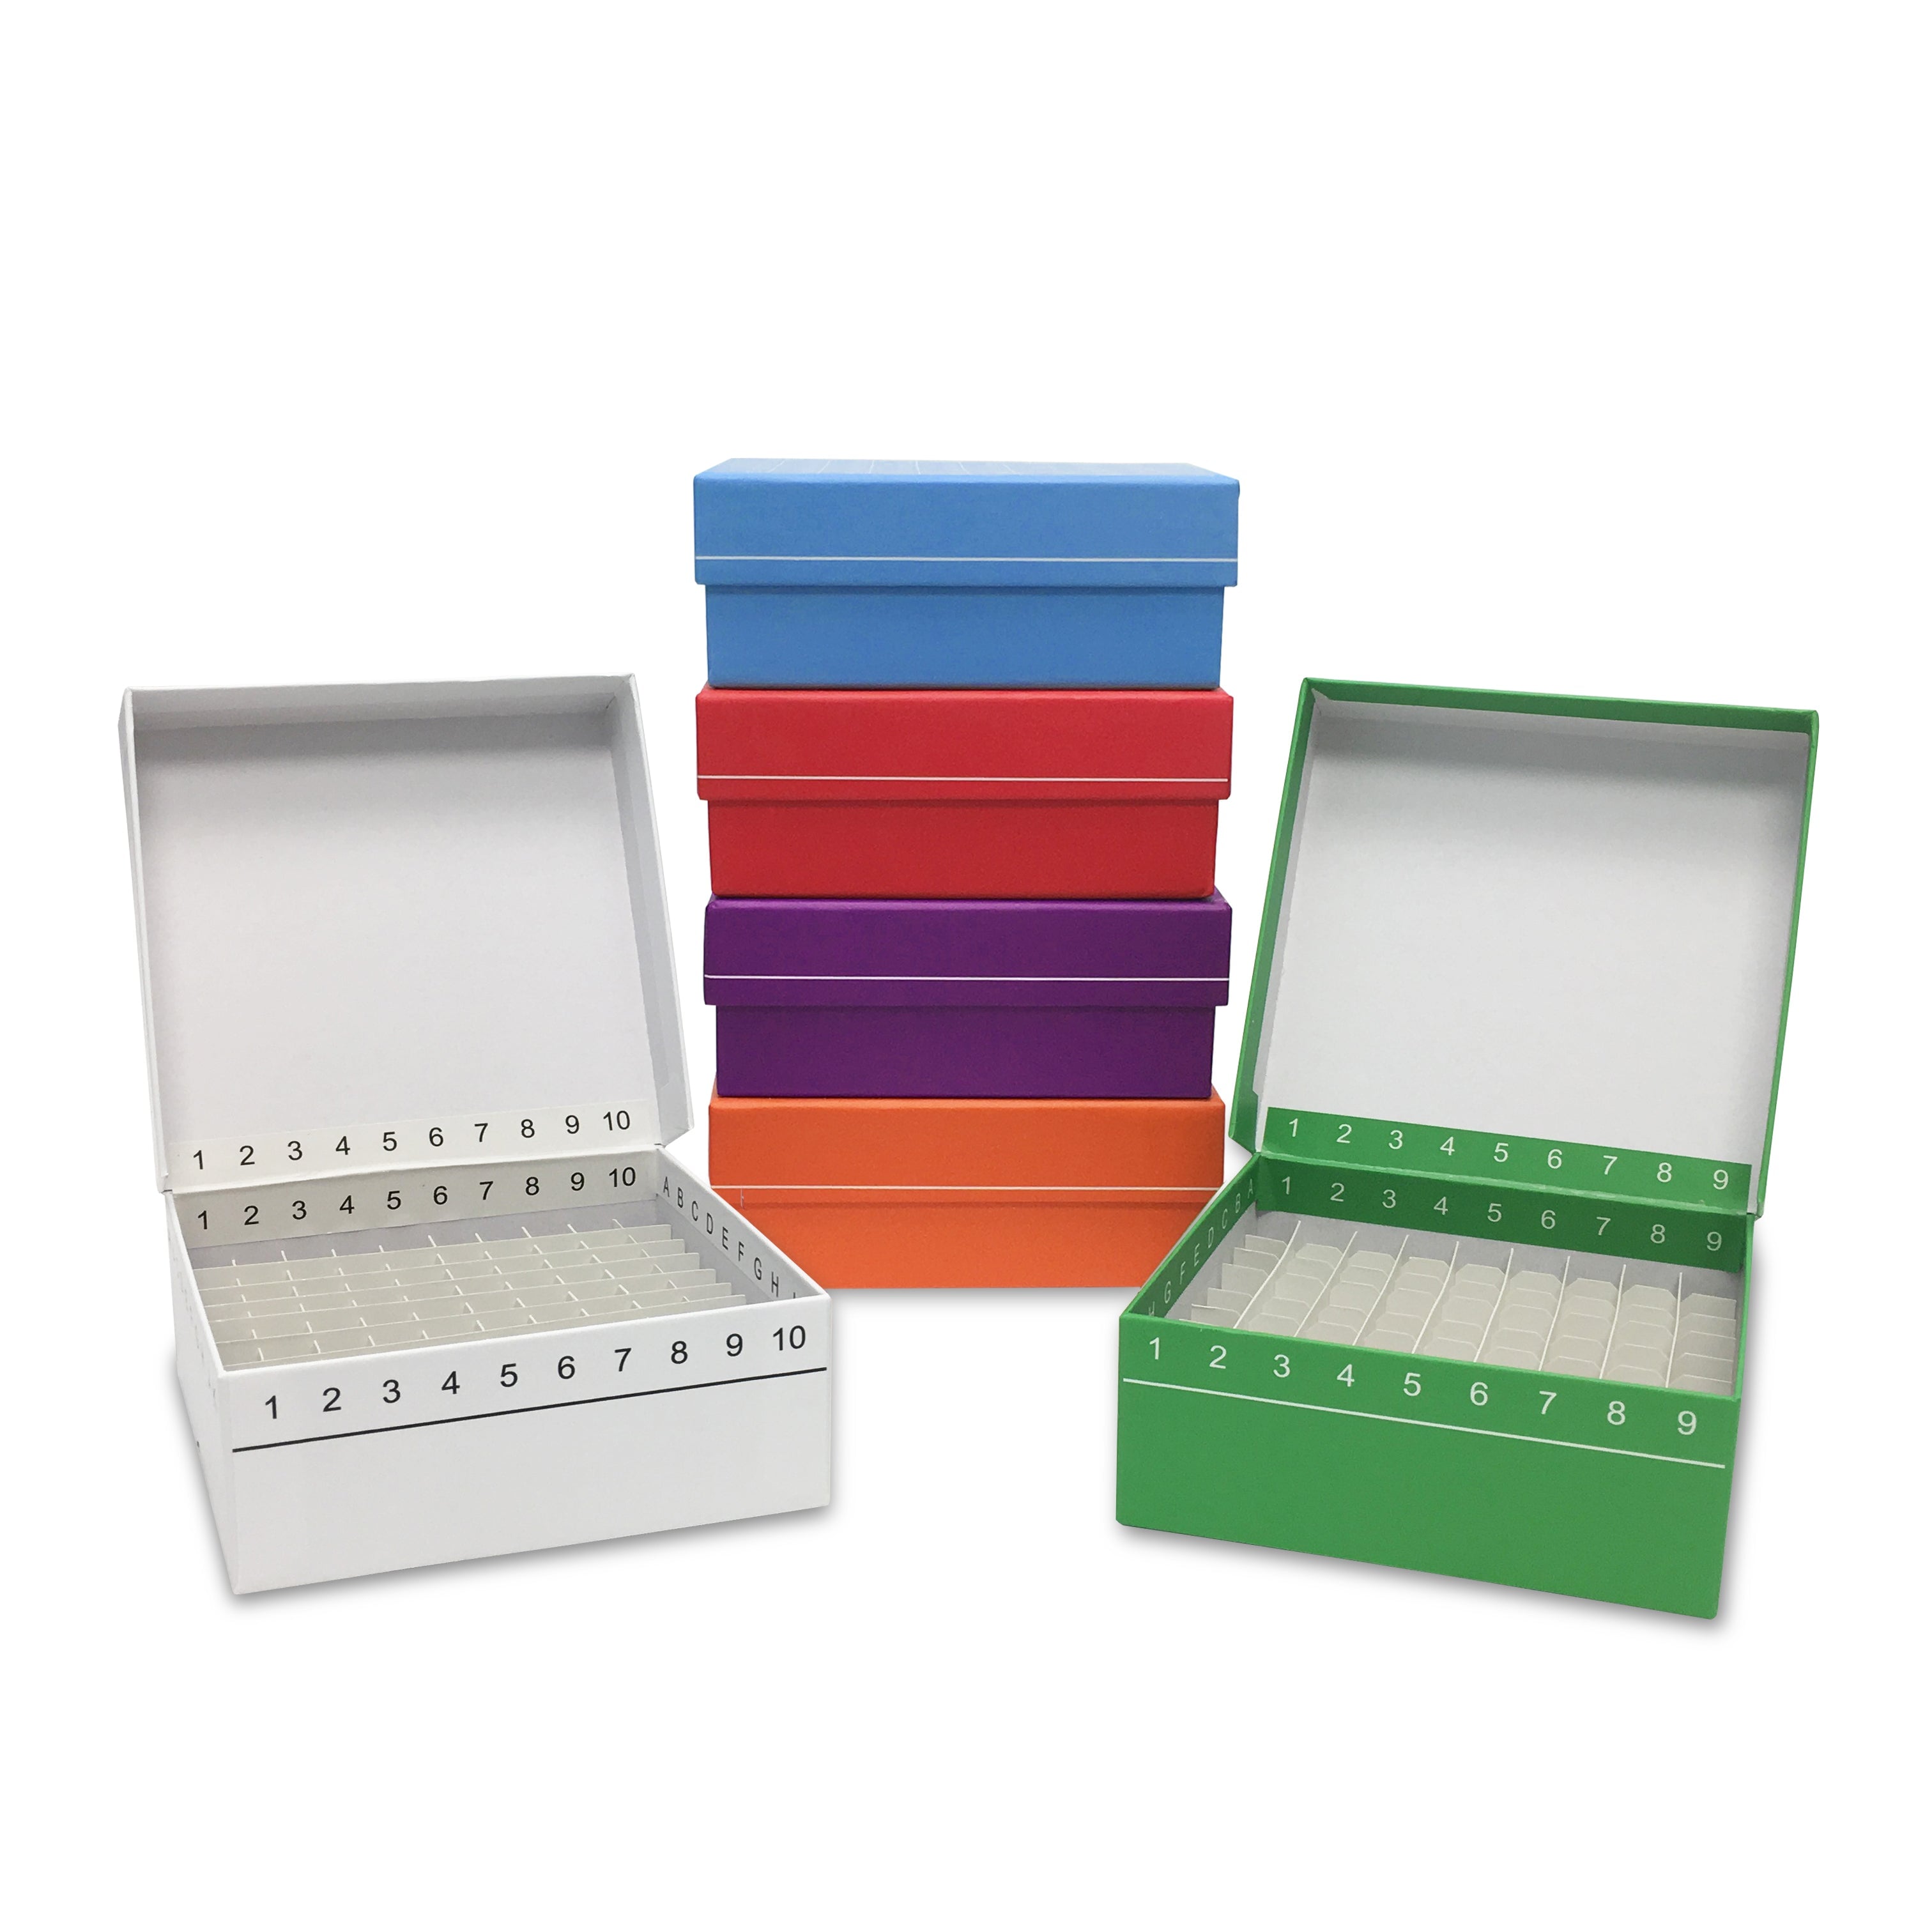 MTC Bio R2781-A FlipTop™ Carboard freezer box w/ attached hinged lid, 81-place, assorted colors, 5/pk